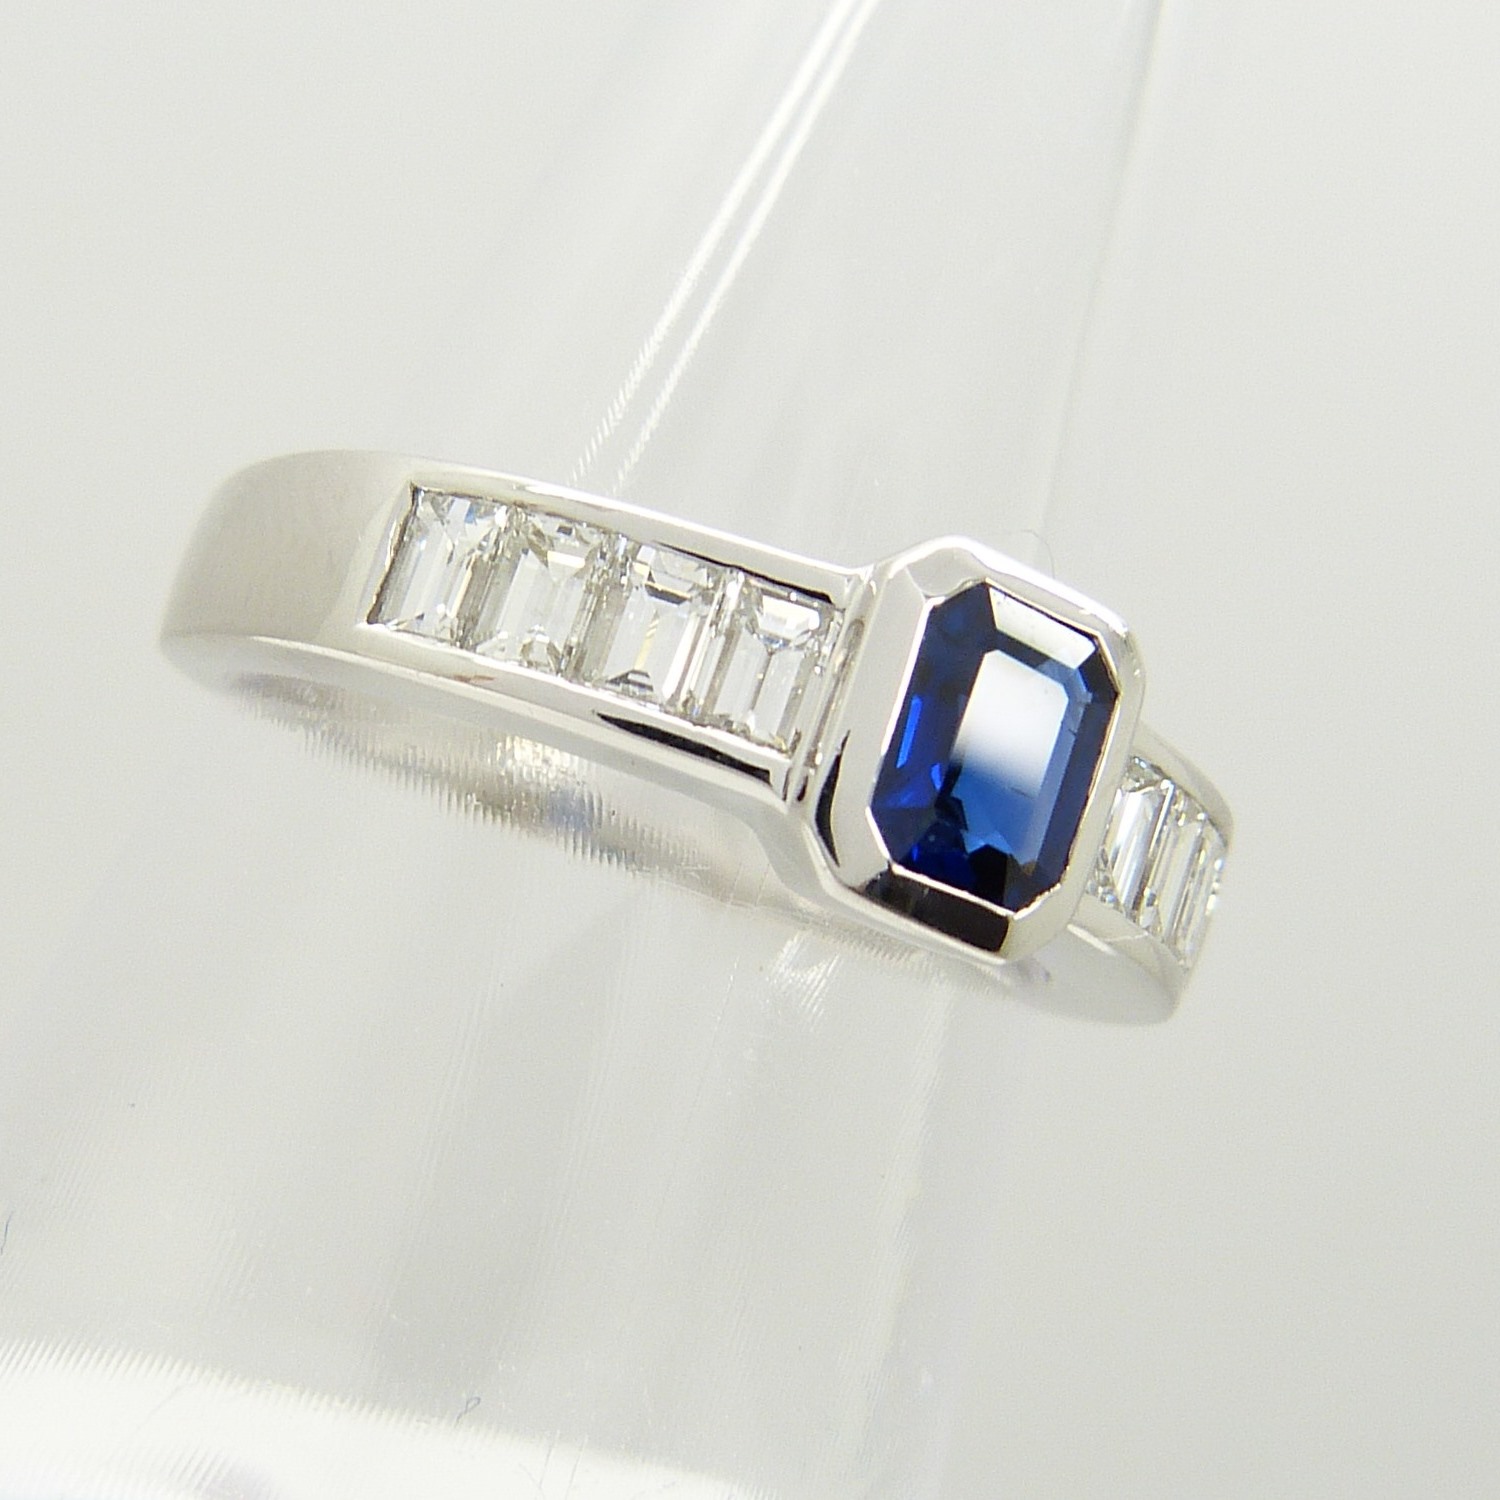 18ct white gold step-cut, sapphire and baguette-cut diamond dress ring - Image 6 of 6